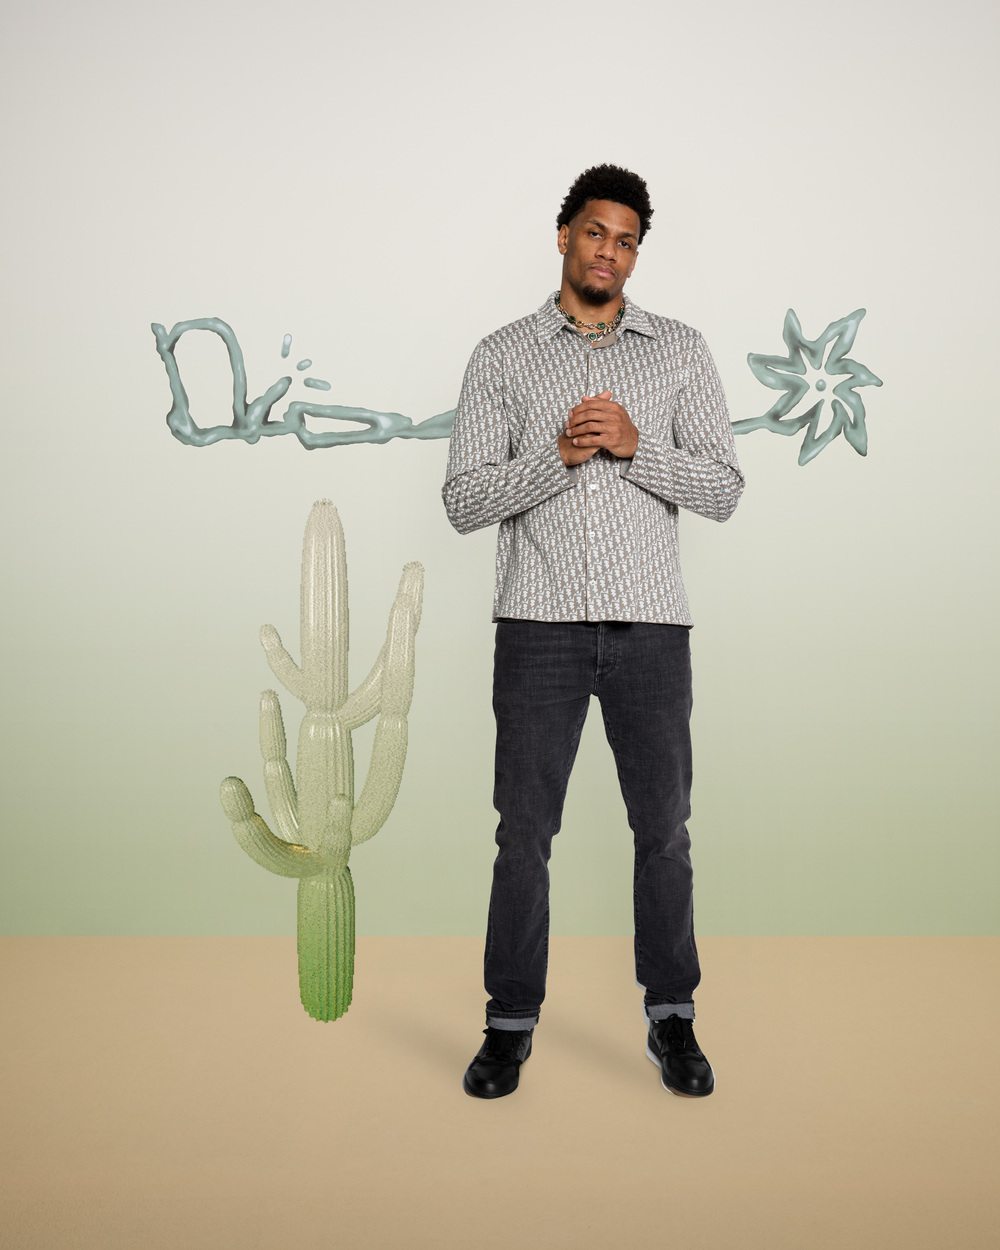 Axel Toupane wearing the Cactus Jack Dior collection 